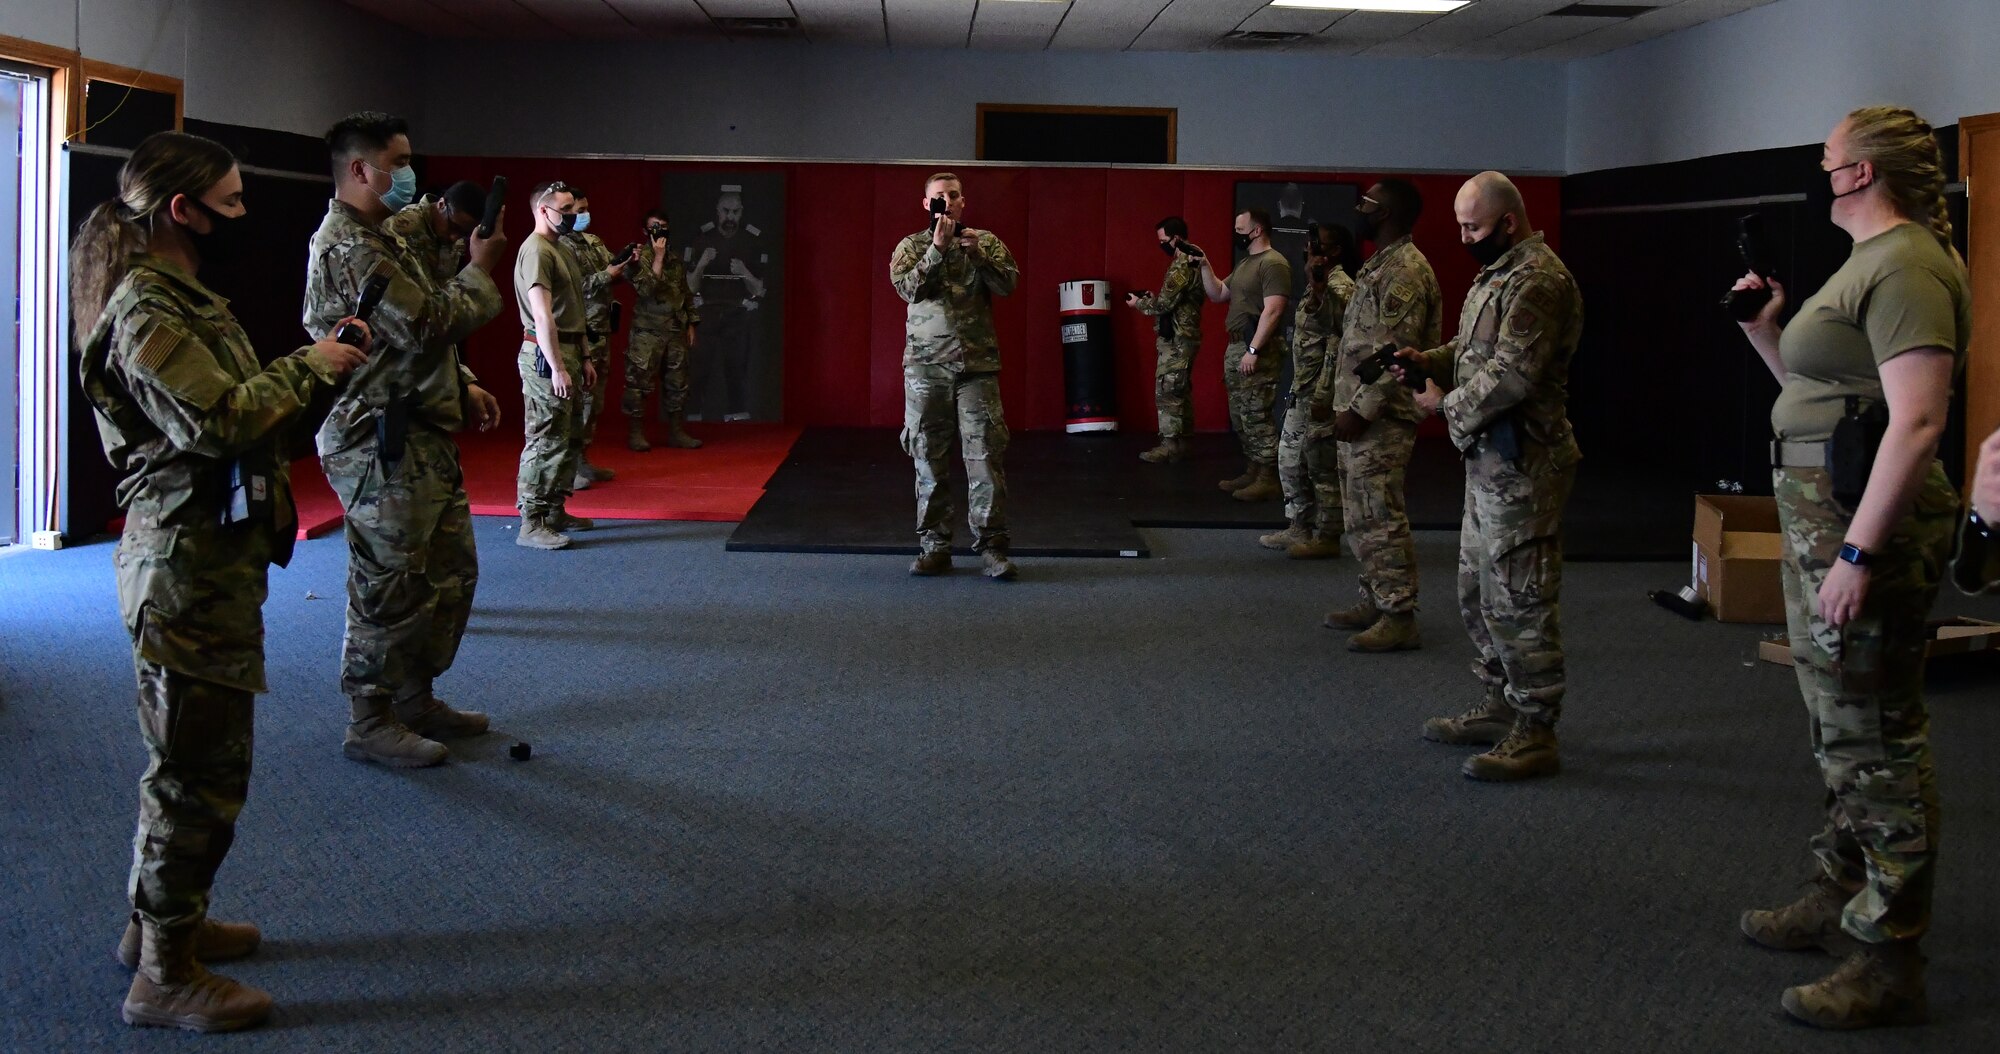 926th Security Forces Squadron practices Taser drills during their Leader Led Training Course, April 10, 2021, at Nellis Air Force Base, Nevada.